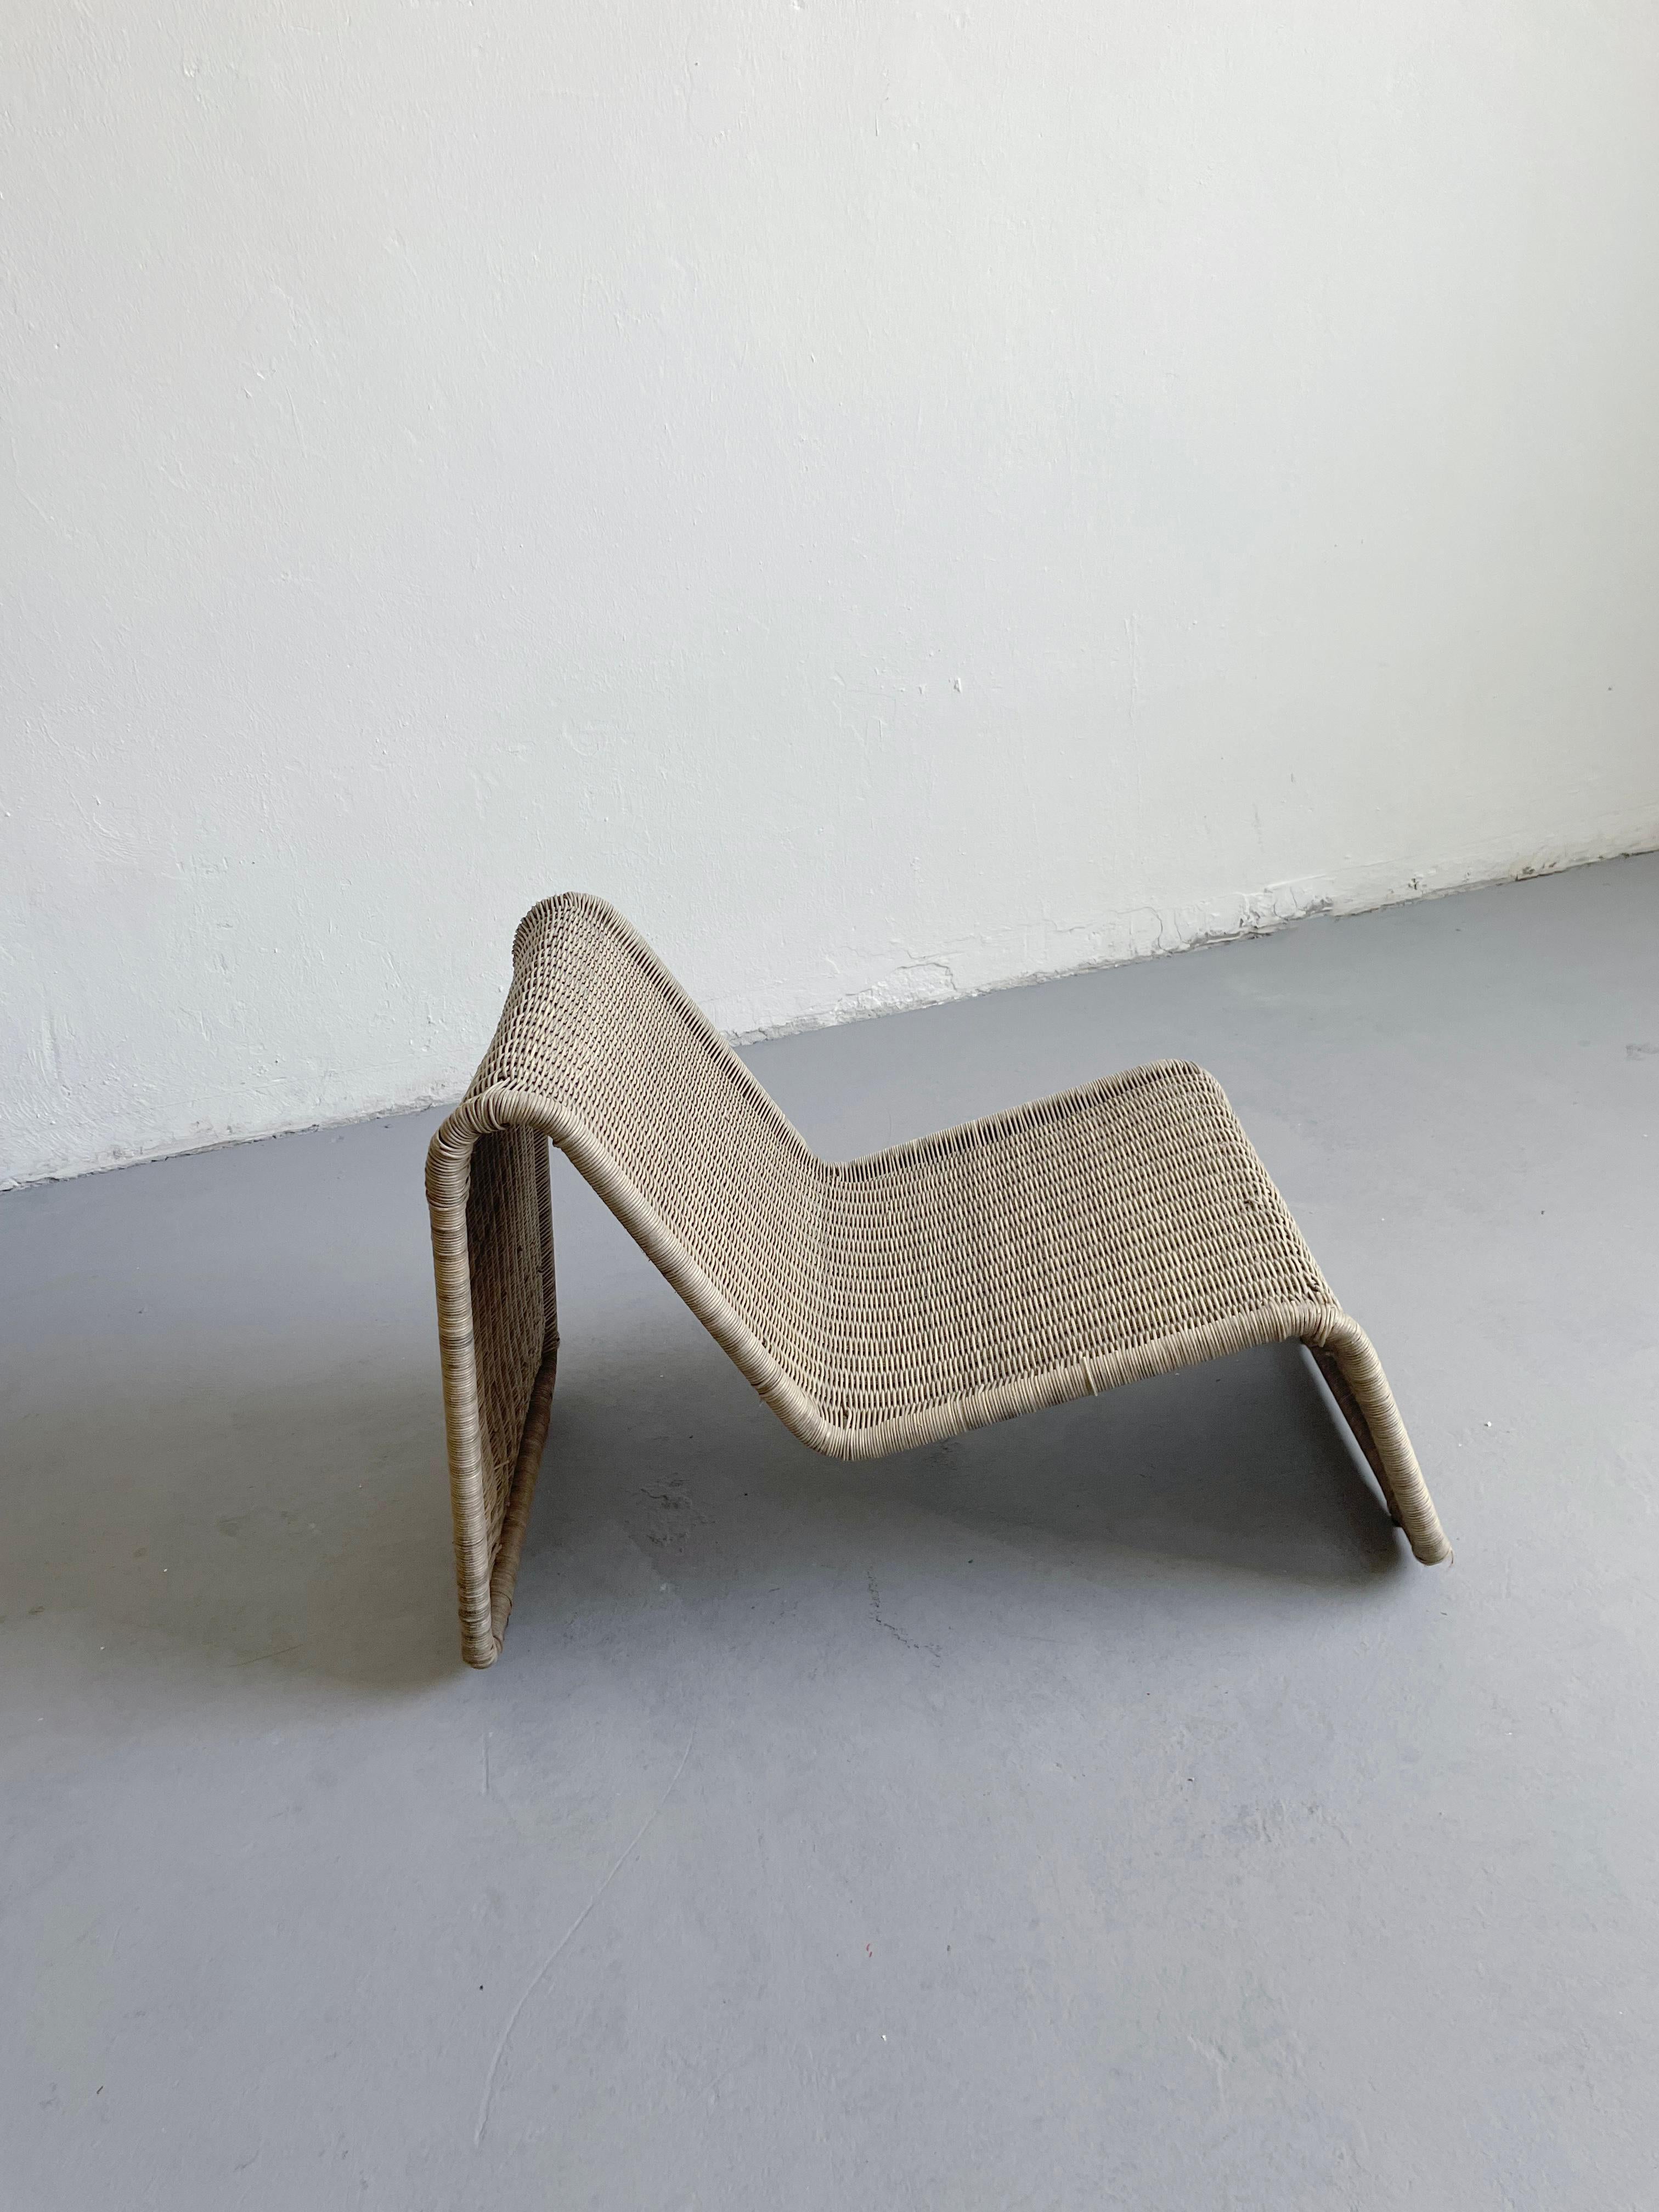 Late 20th Century Vintage Bent Lounge Chair in Rattan, Ikea Hestra, Tito Agnoli P3 Style, 1982